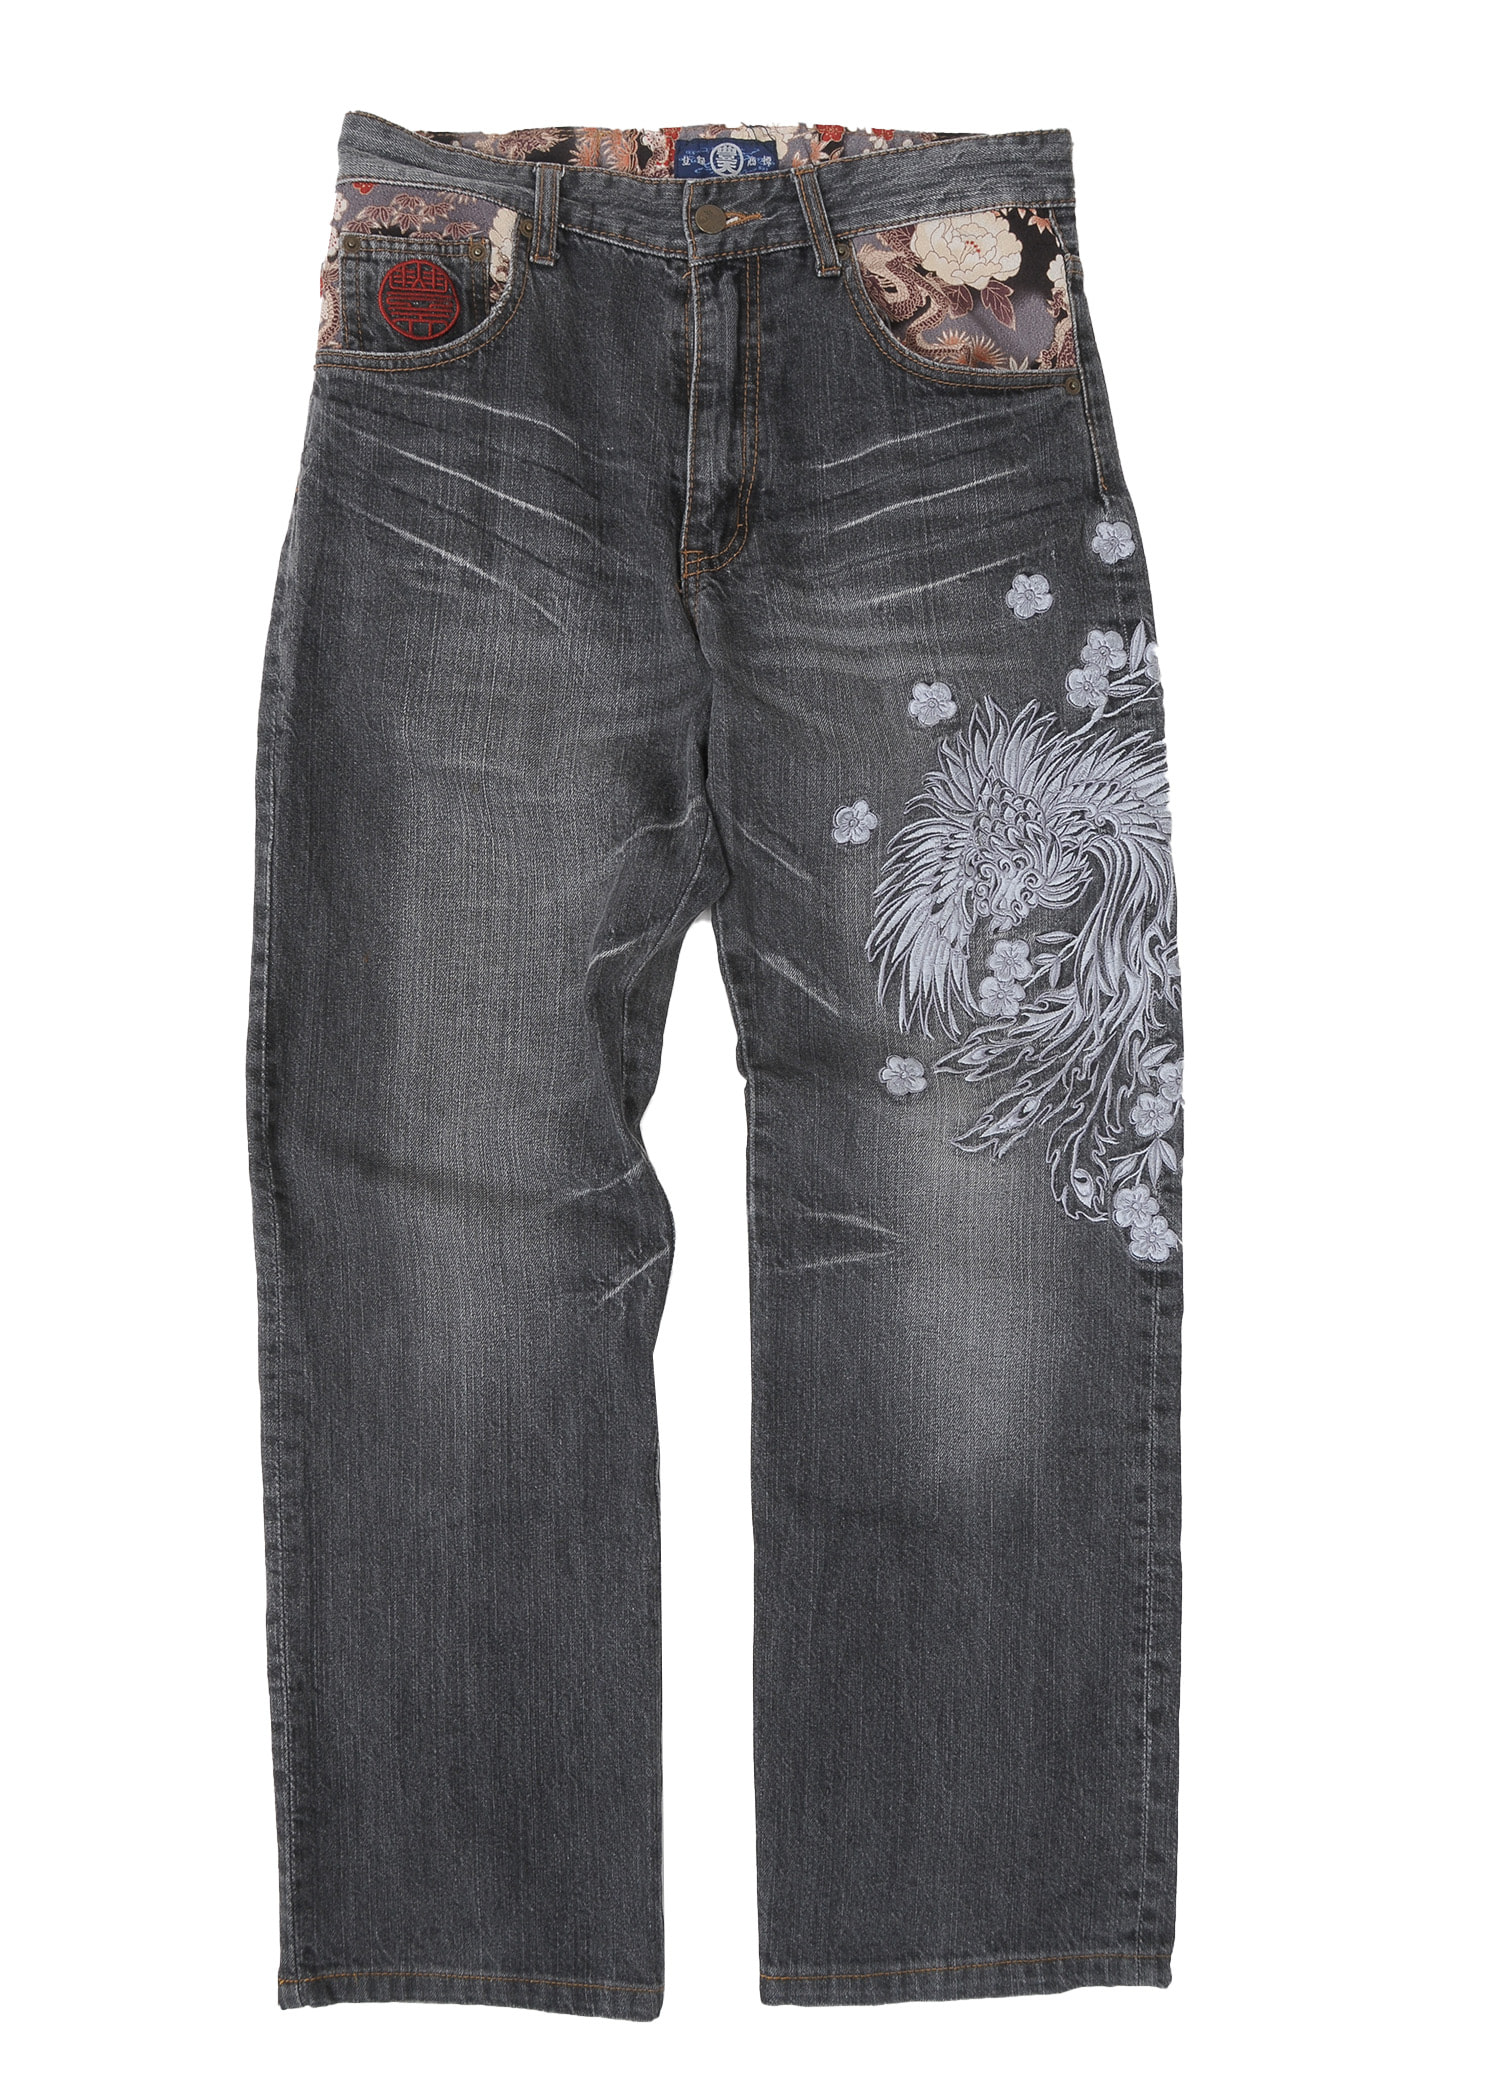 select vintage : embroied pants